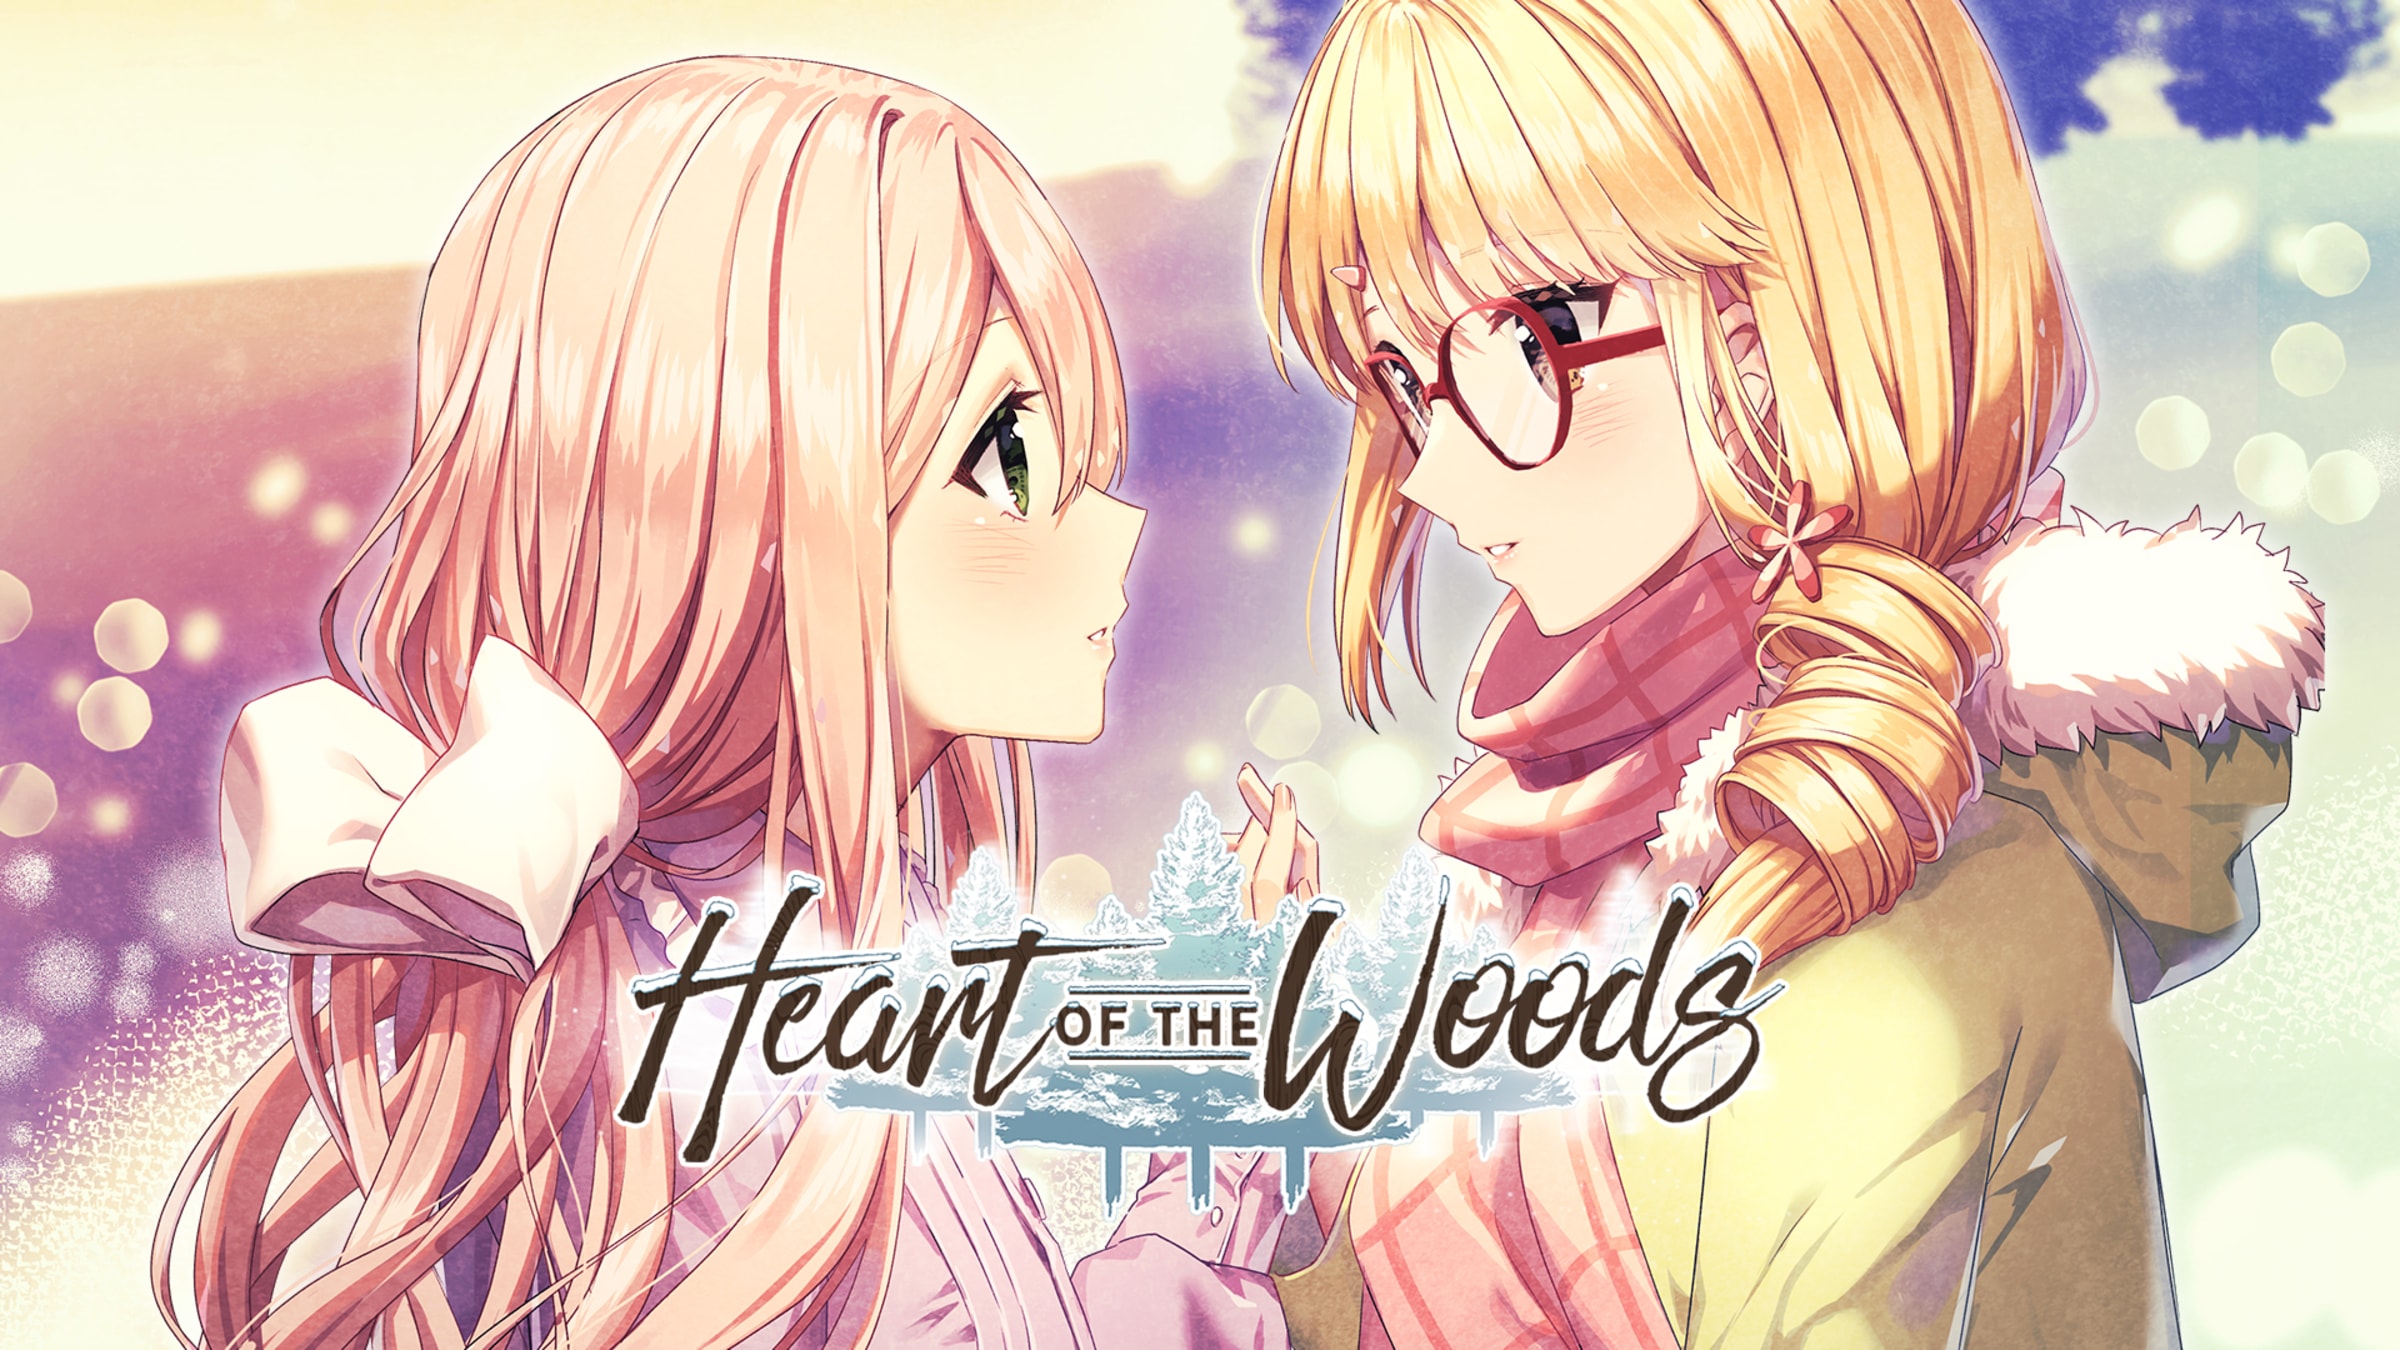 Heart of the Woods for Nintendo Switch - Nintendo Official Site